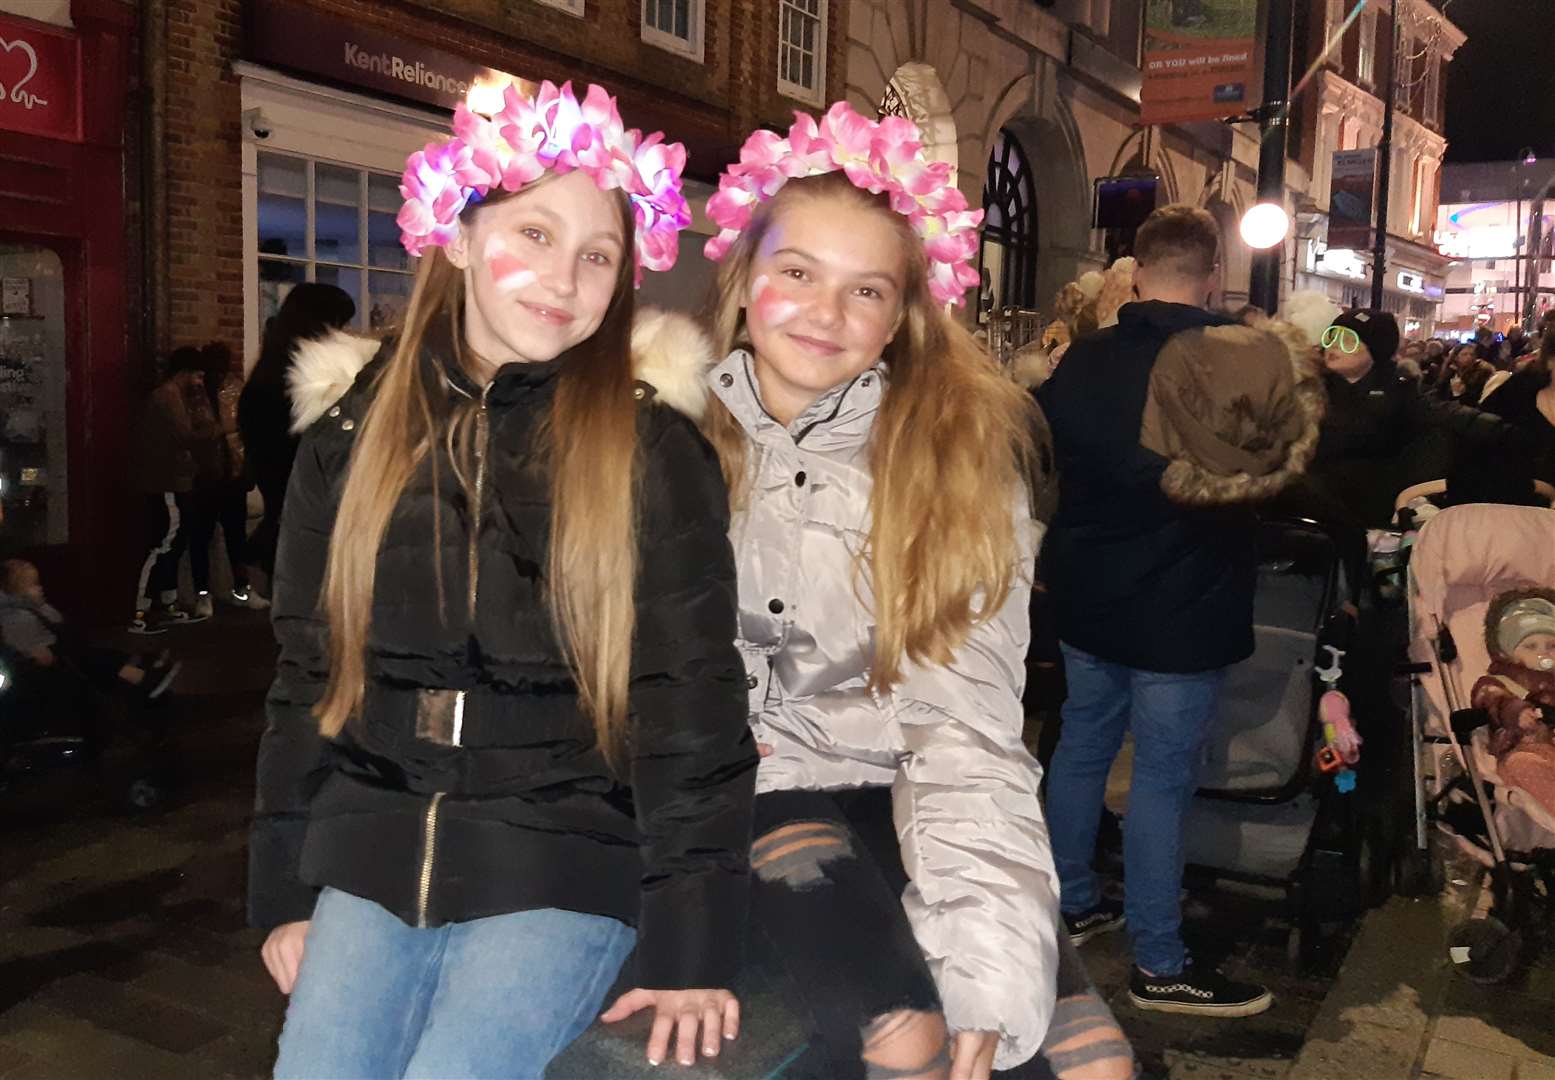 Jersey Heath, 11, and Maisie Barrett, 11, at the Maidstone Christmas lights switch on 2021